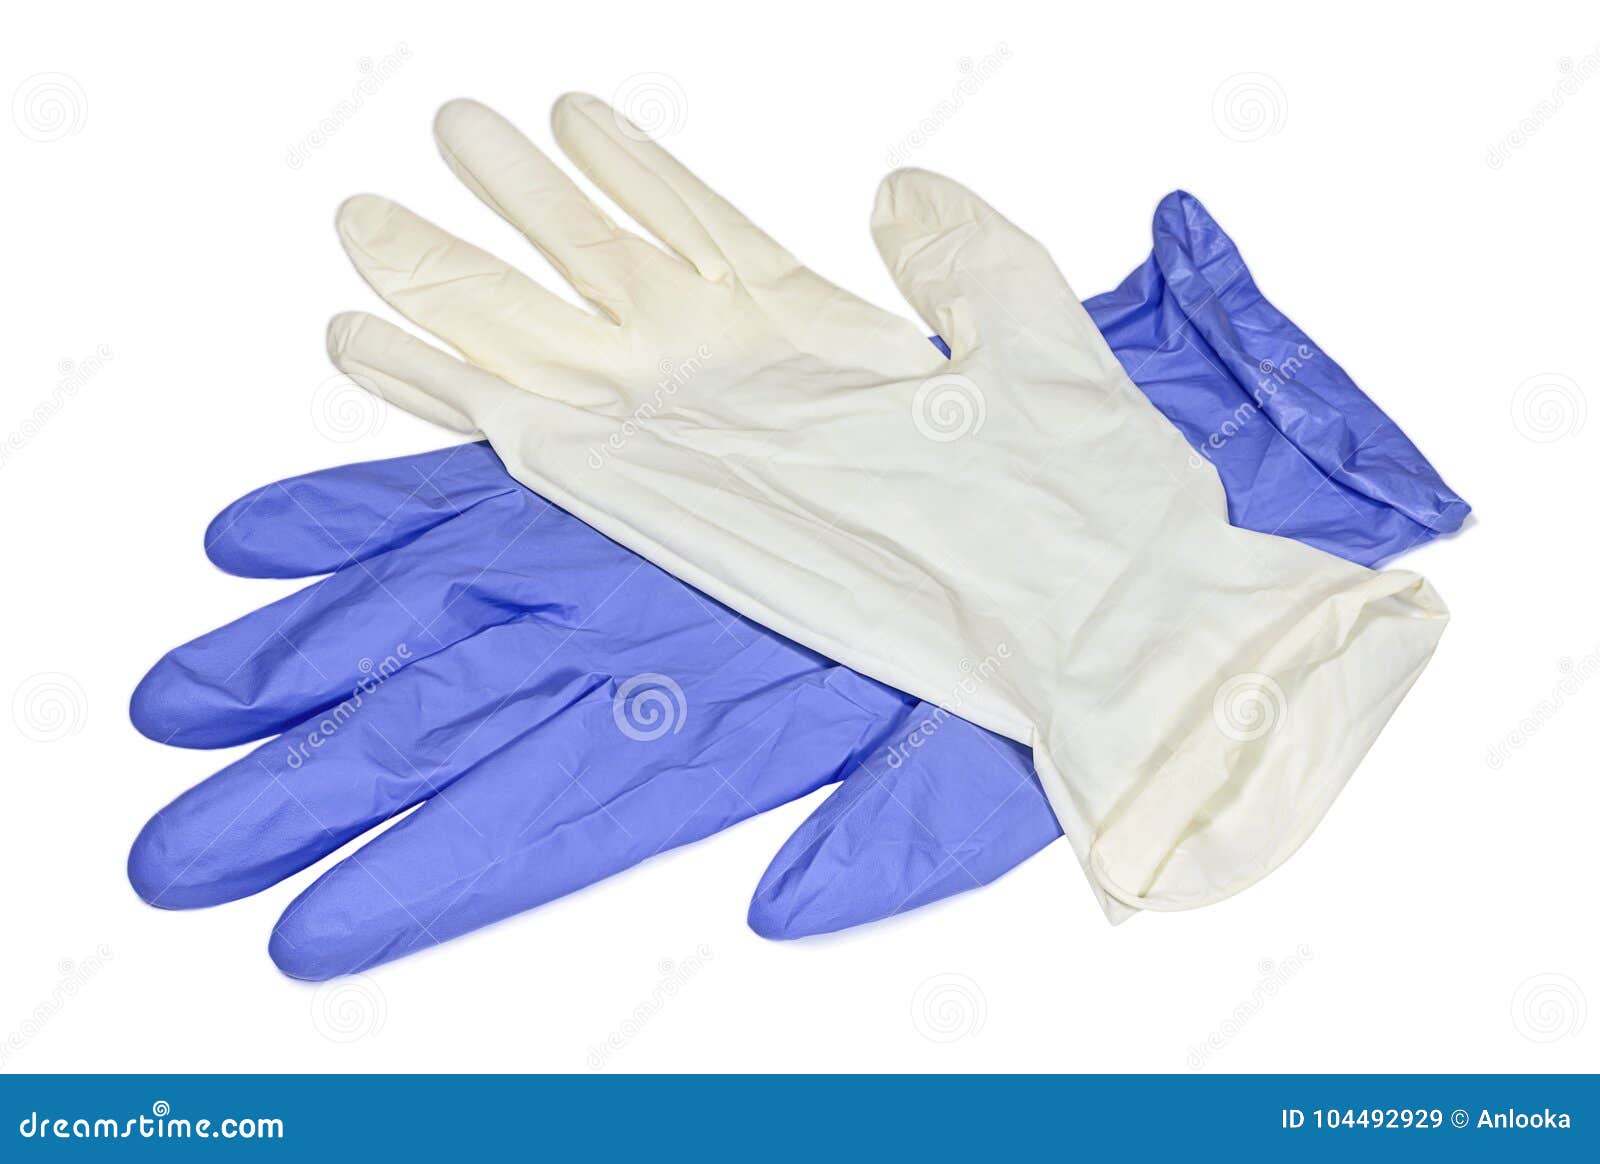 white and blue latex gloves closeup